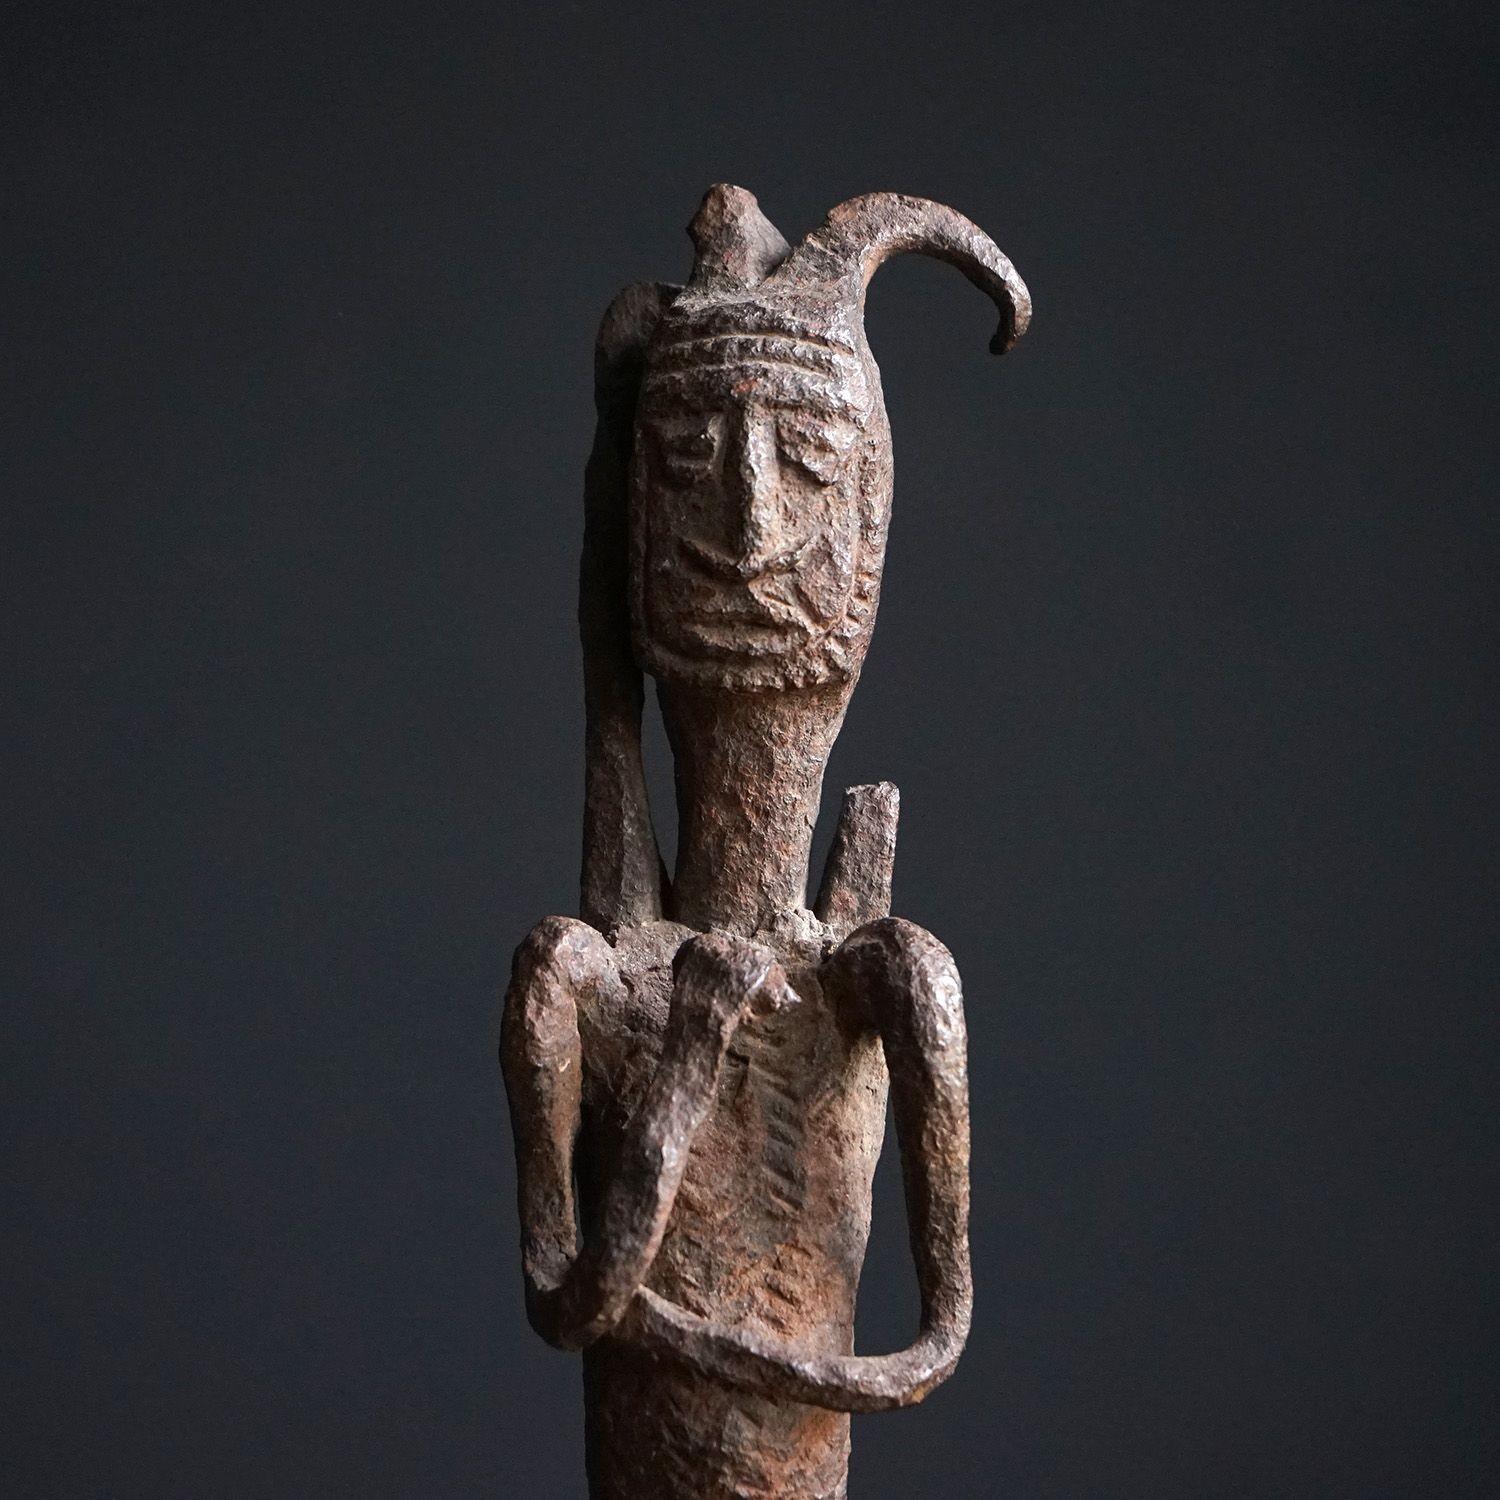 WEST AFRICAN FIGURE
Depicting a male figure with wonderful character, possibly relating to fertility and masculinity due to his genitalia.
 
It would have originally been the top of a long iron staff.
 
On complimentary neutral metal stand.
